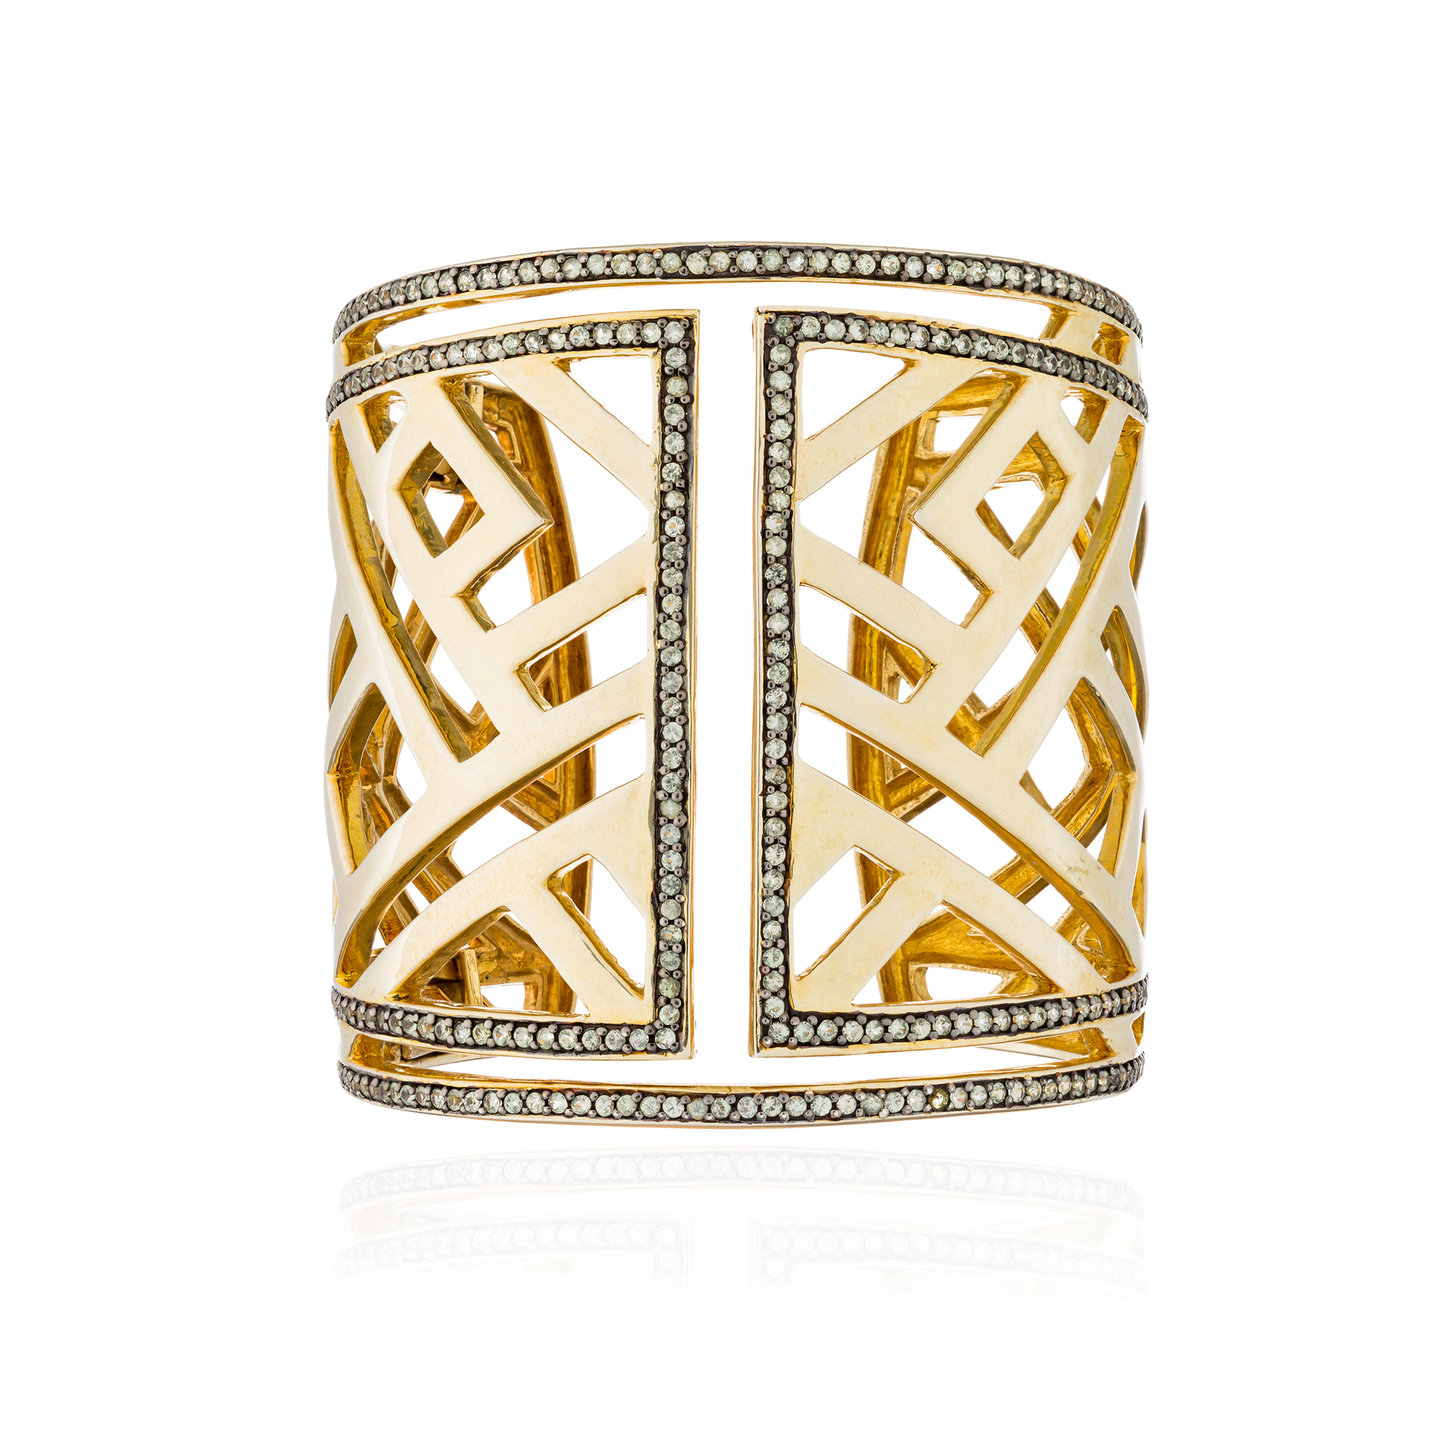 Edge Pavé 925 Silver Cuff Bracelet with Green Sapphires